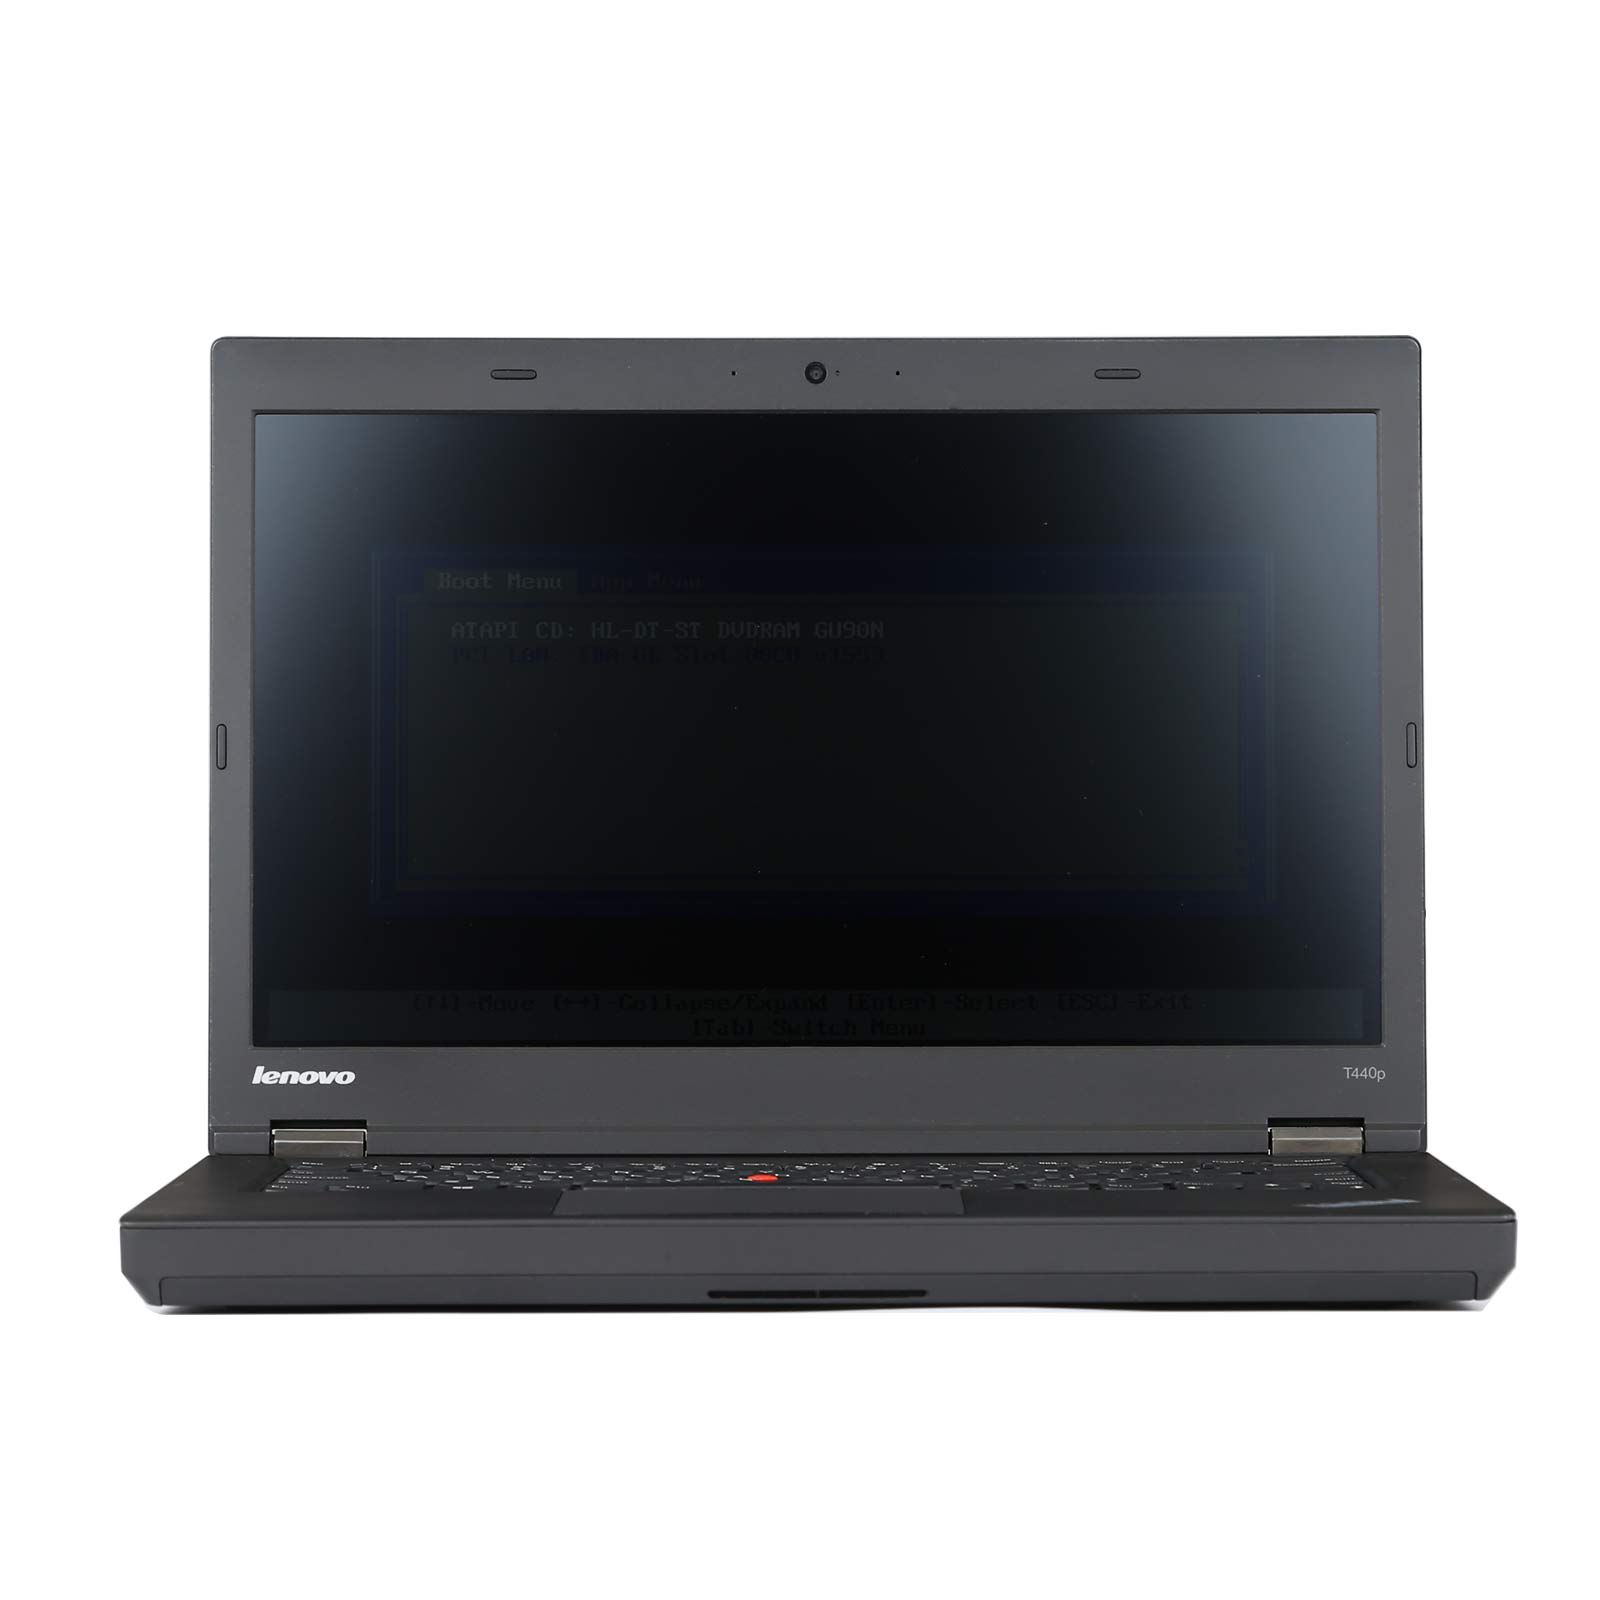 V2023.3 MB SD C4 Plus Support Doip with SSD Plus Lenovo T440P Laptop I7 8GB Laptop Software Installed Ready to Use Free Shipping by DHL